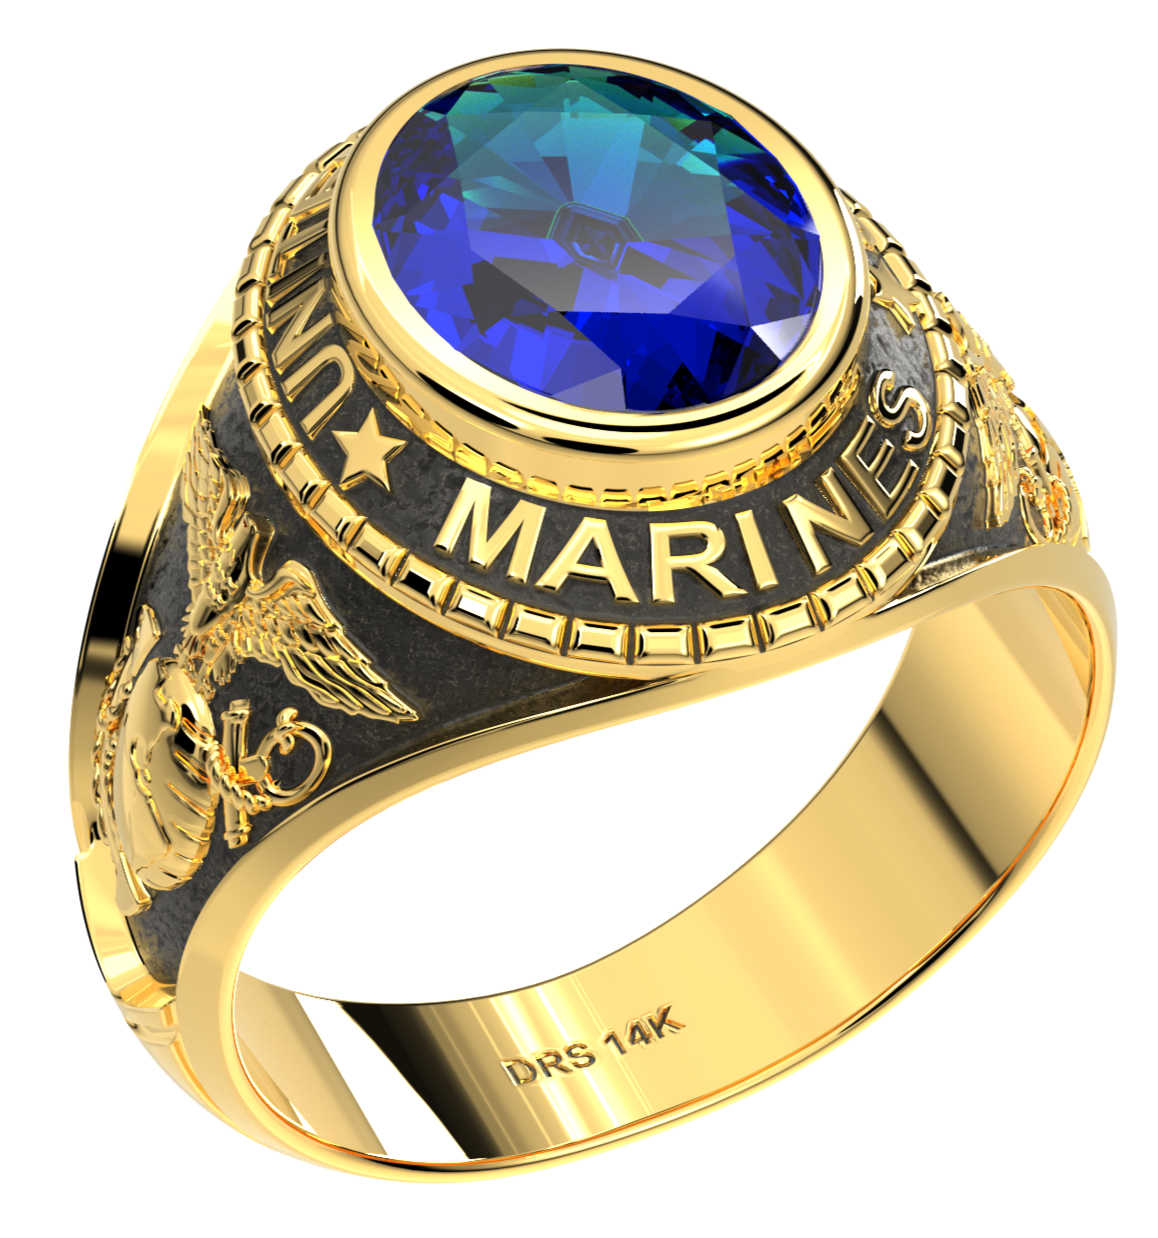 Customizable Men's 10k or 14k Yellow or White Gold US Marine Corps Military Solid Back Ring